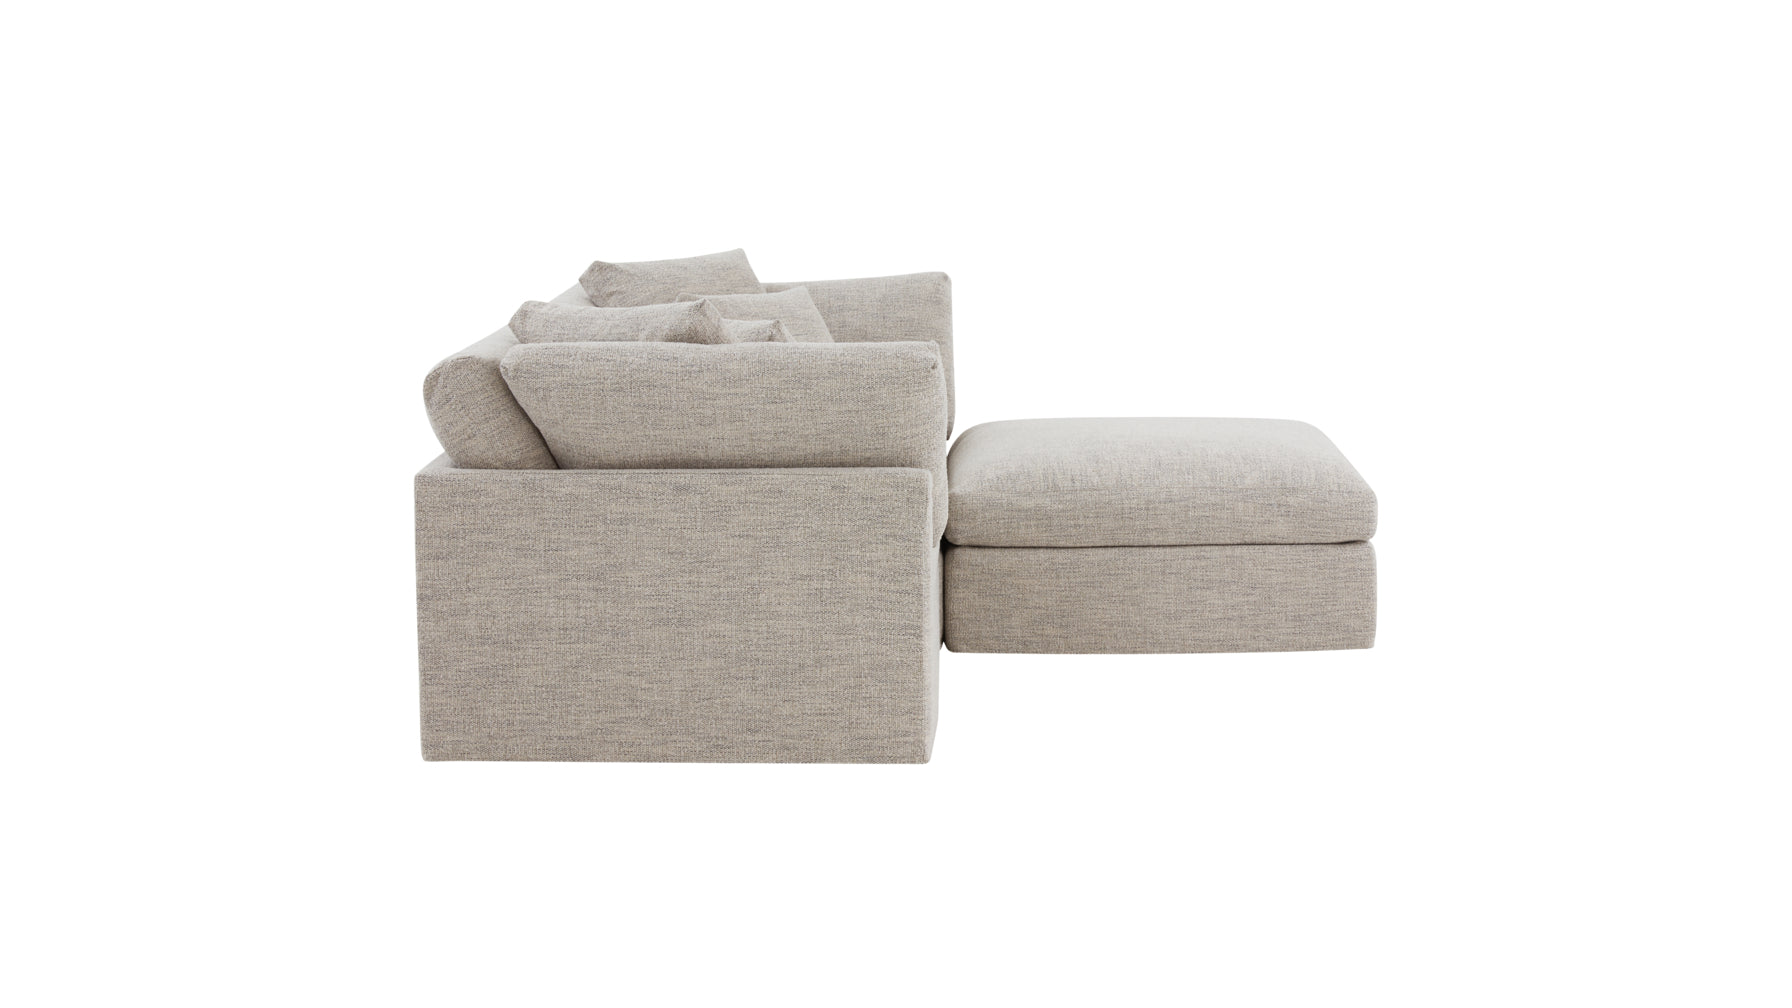 Get Together™ 3-Piece Modular Sectional, Large, Oatmeal - Image 6